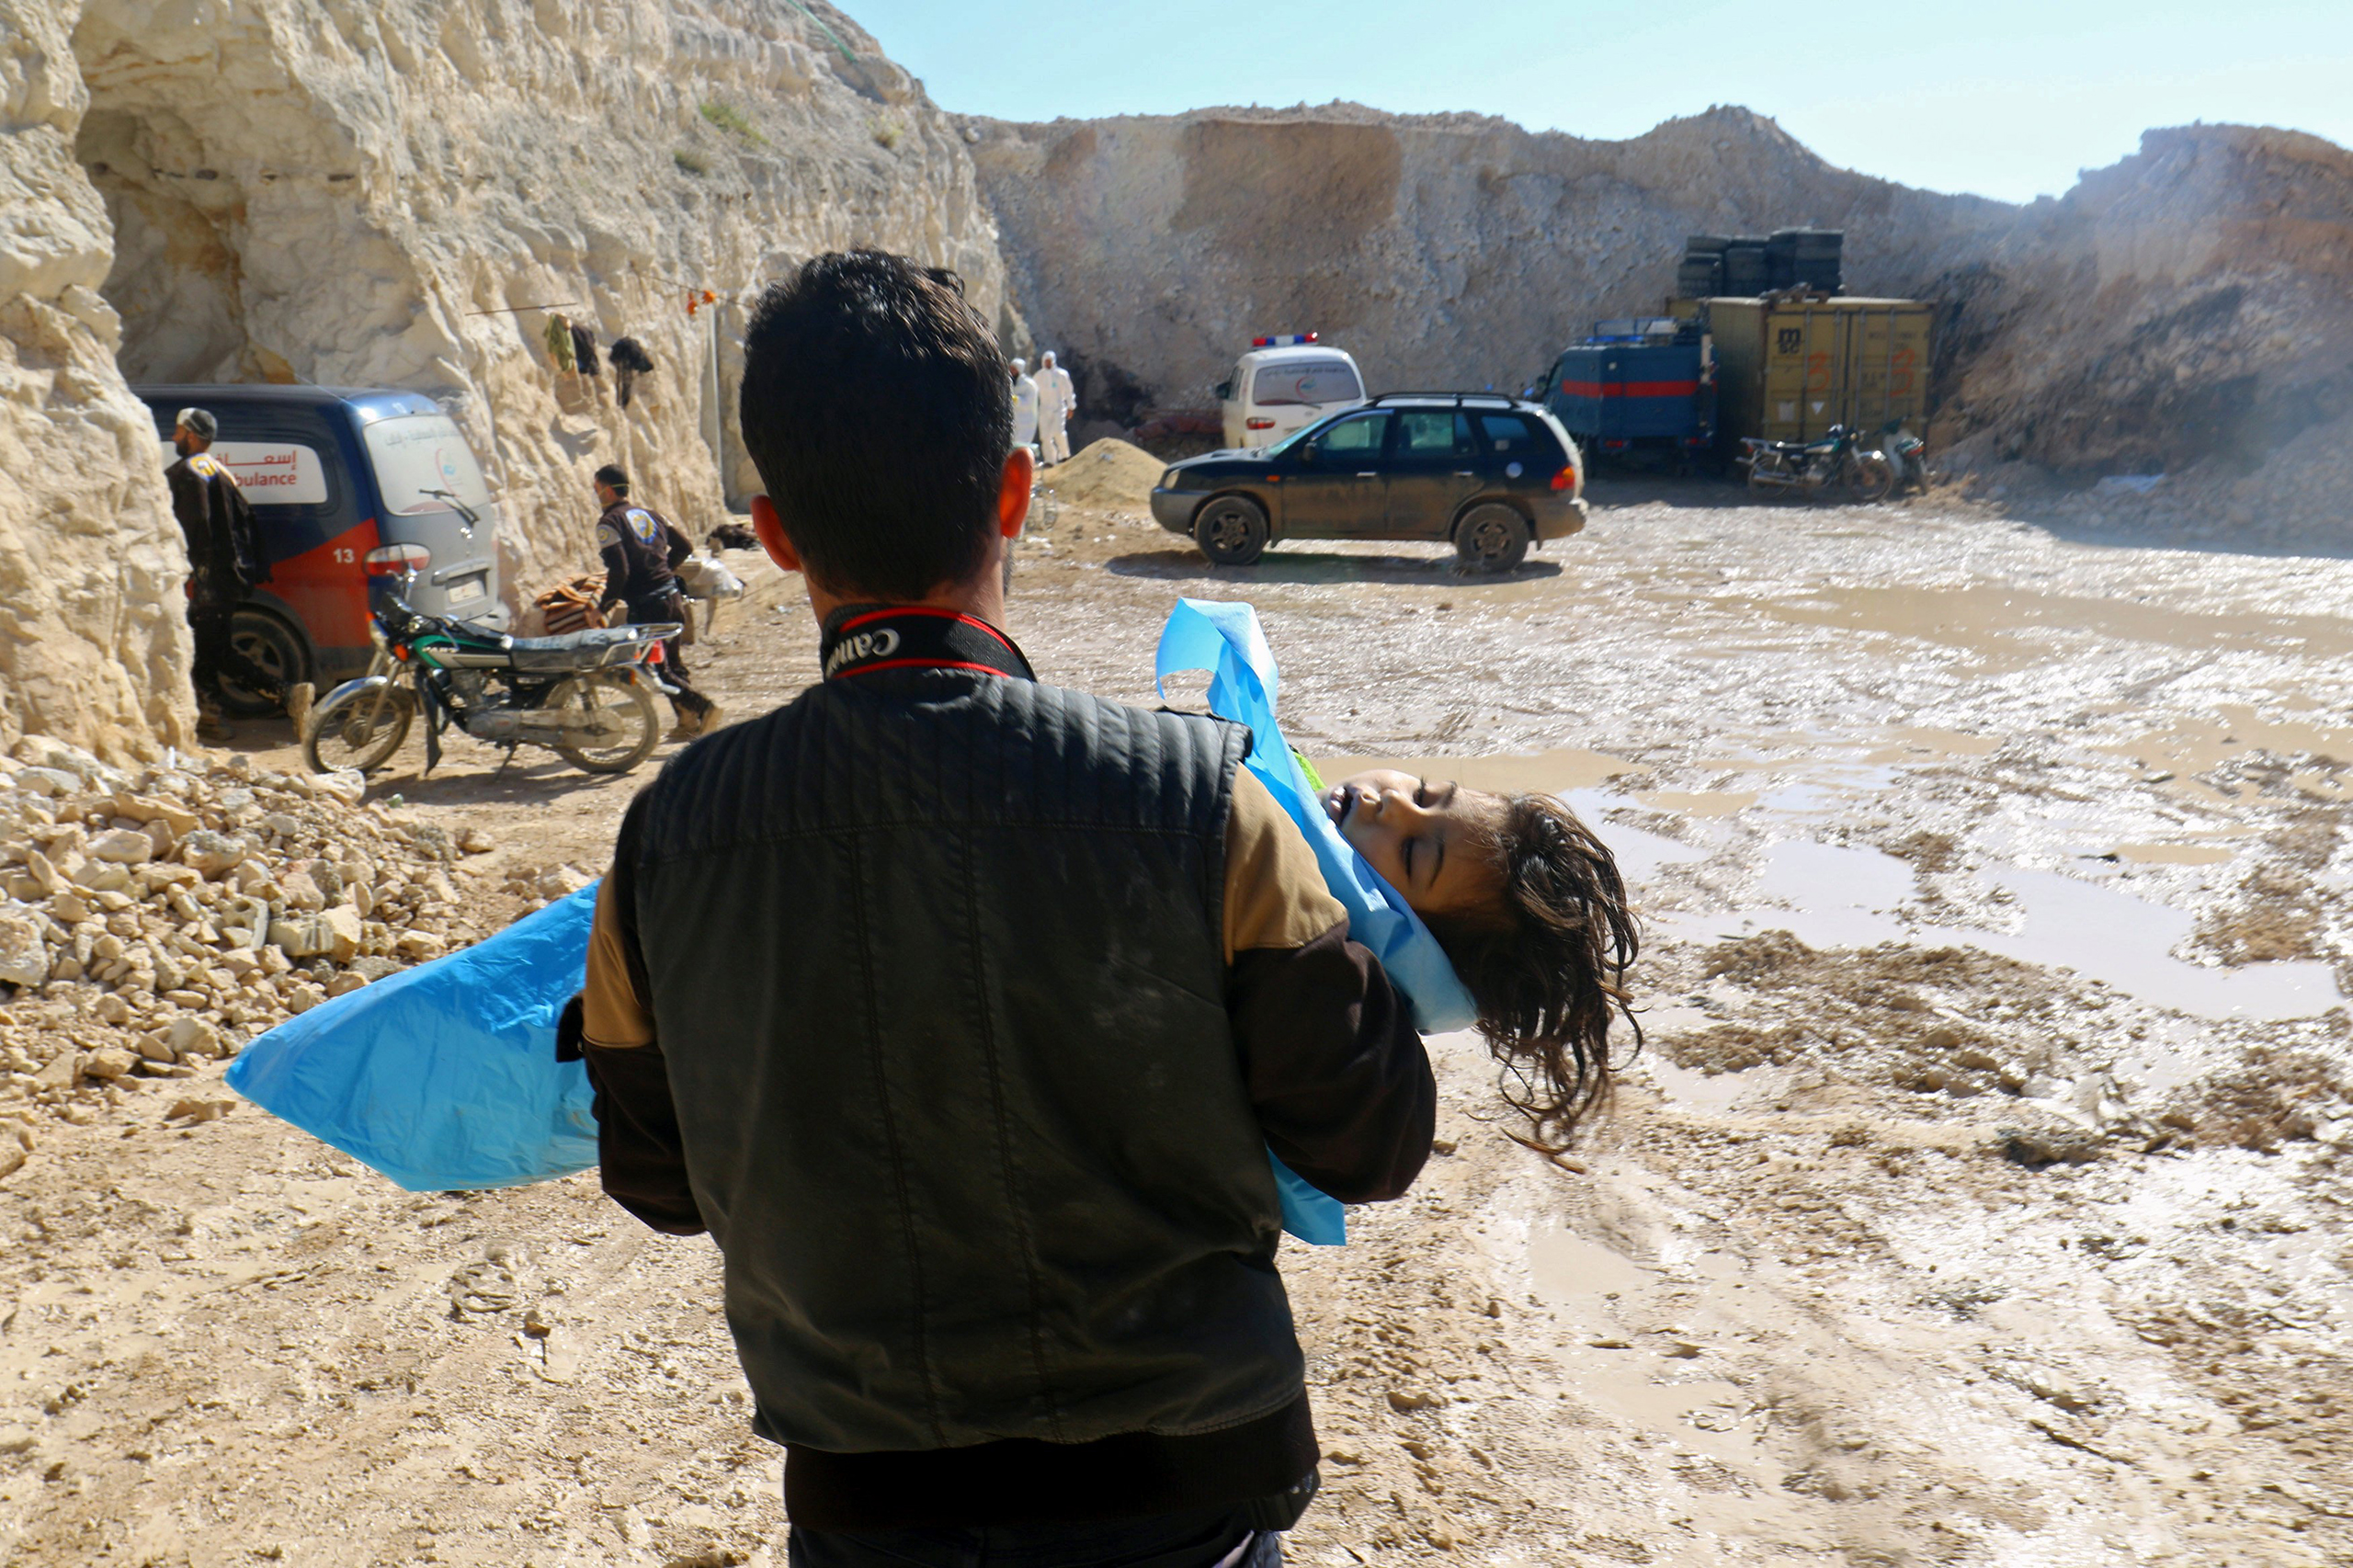 A man carries the body of a dead child, after what rescue workers described as a suspected gas attack in the town of Khan Sheikhoun, Syria, on April 4, 2017.